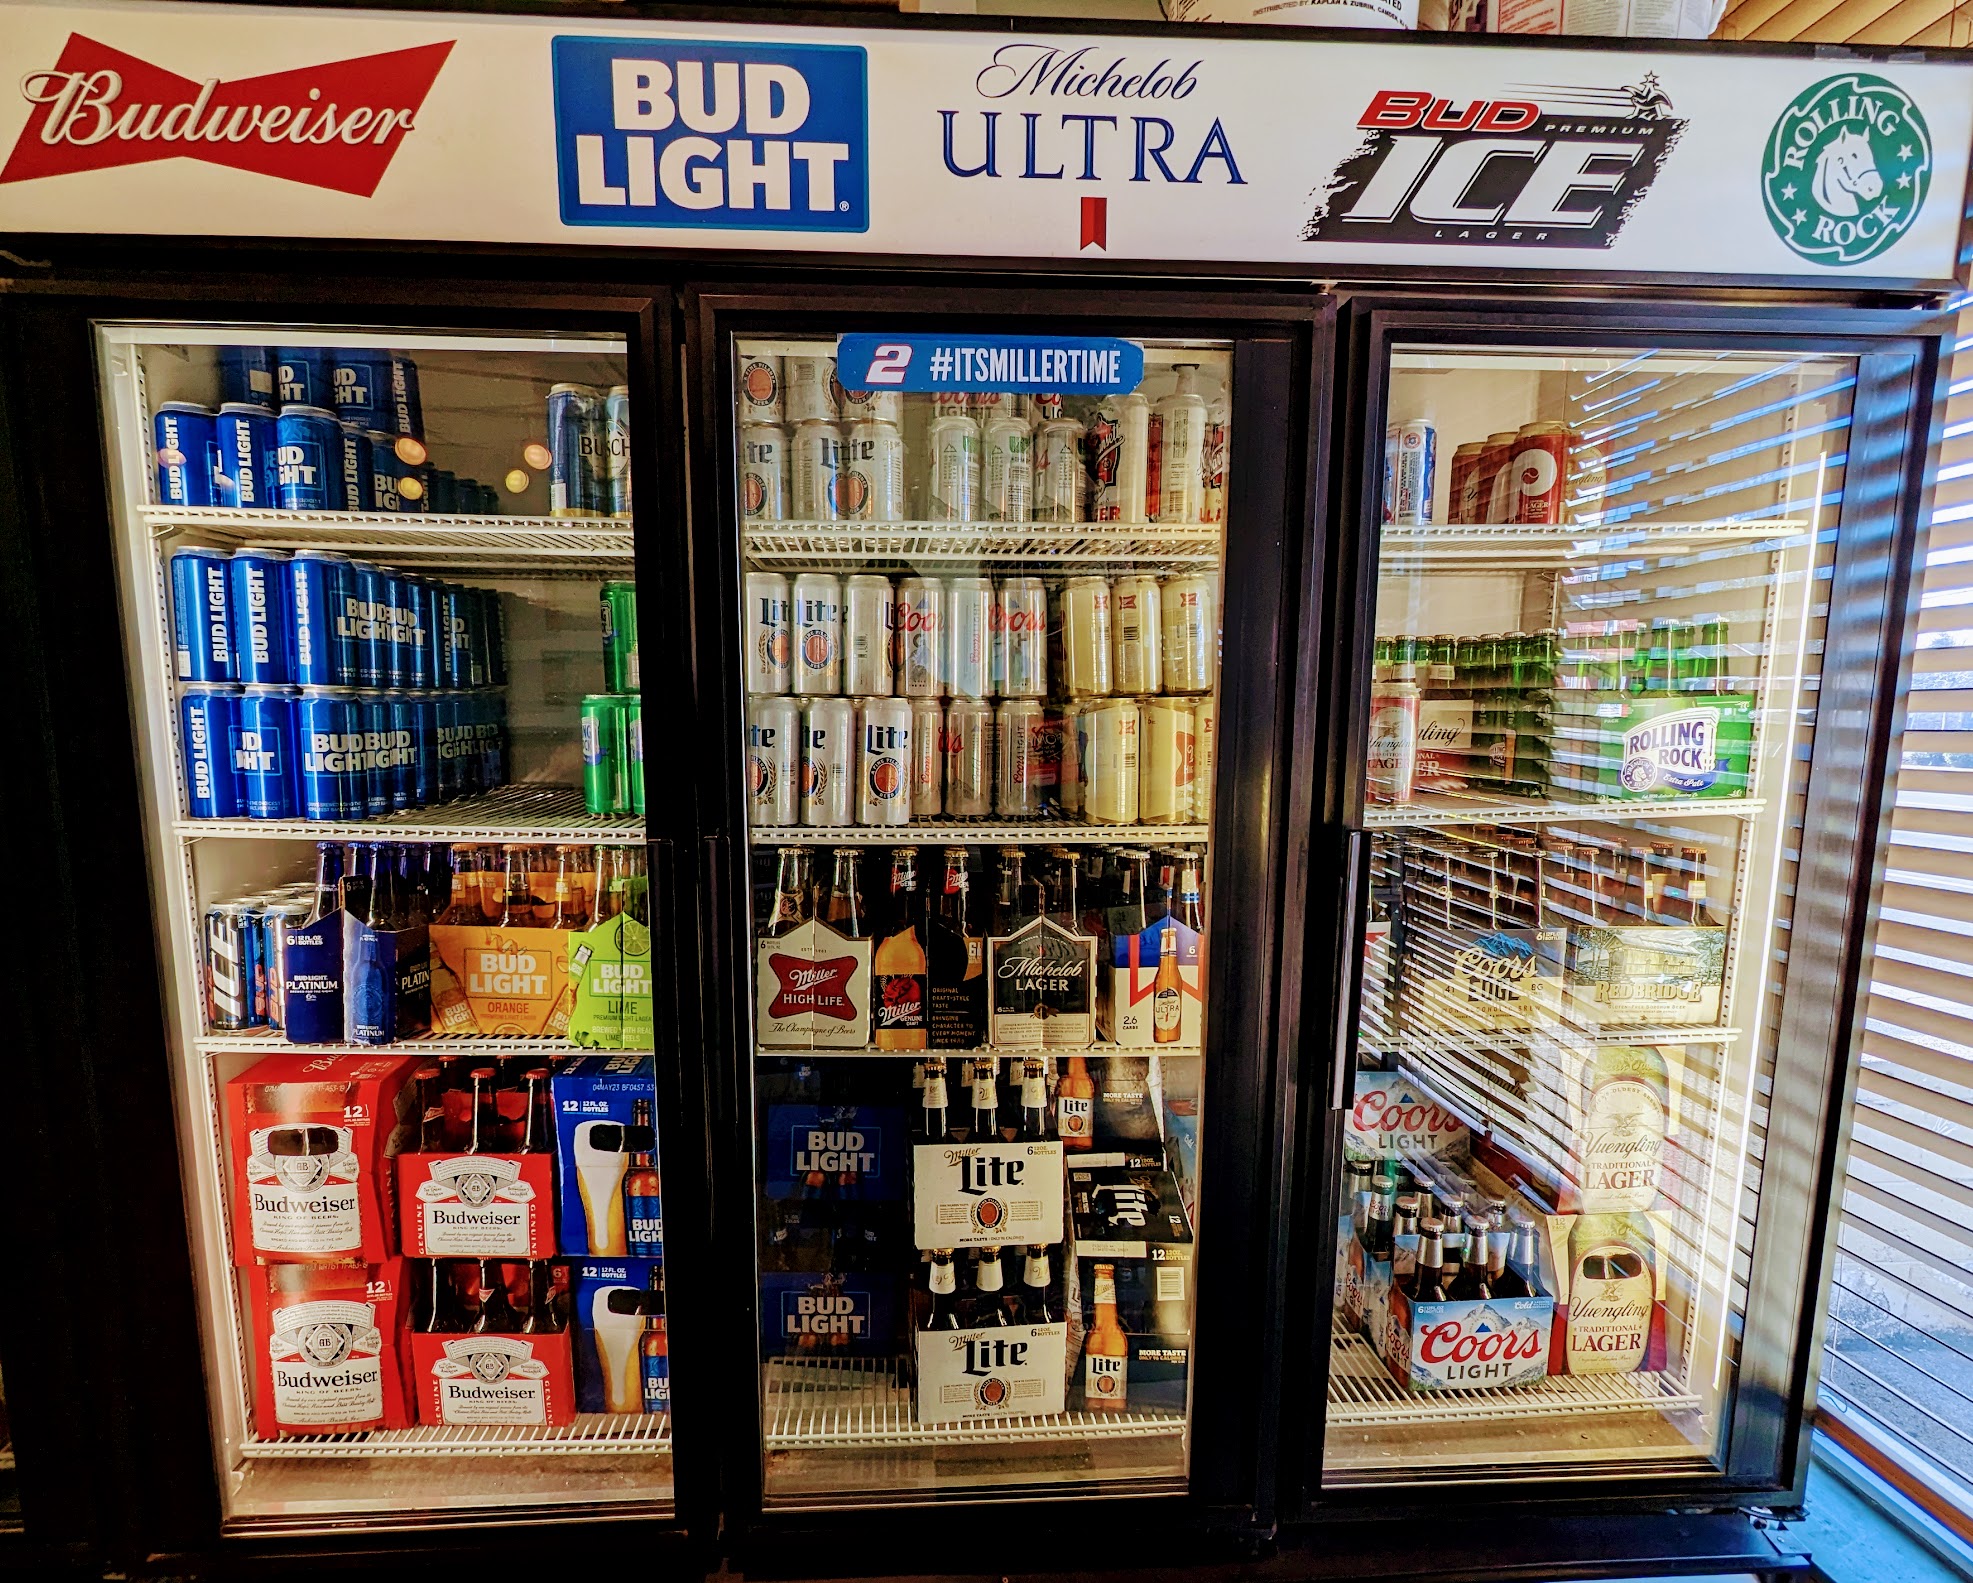 A refrigerator full of beer and soda.